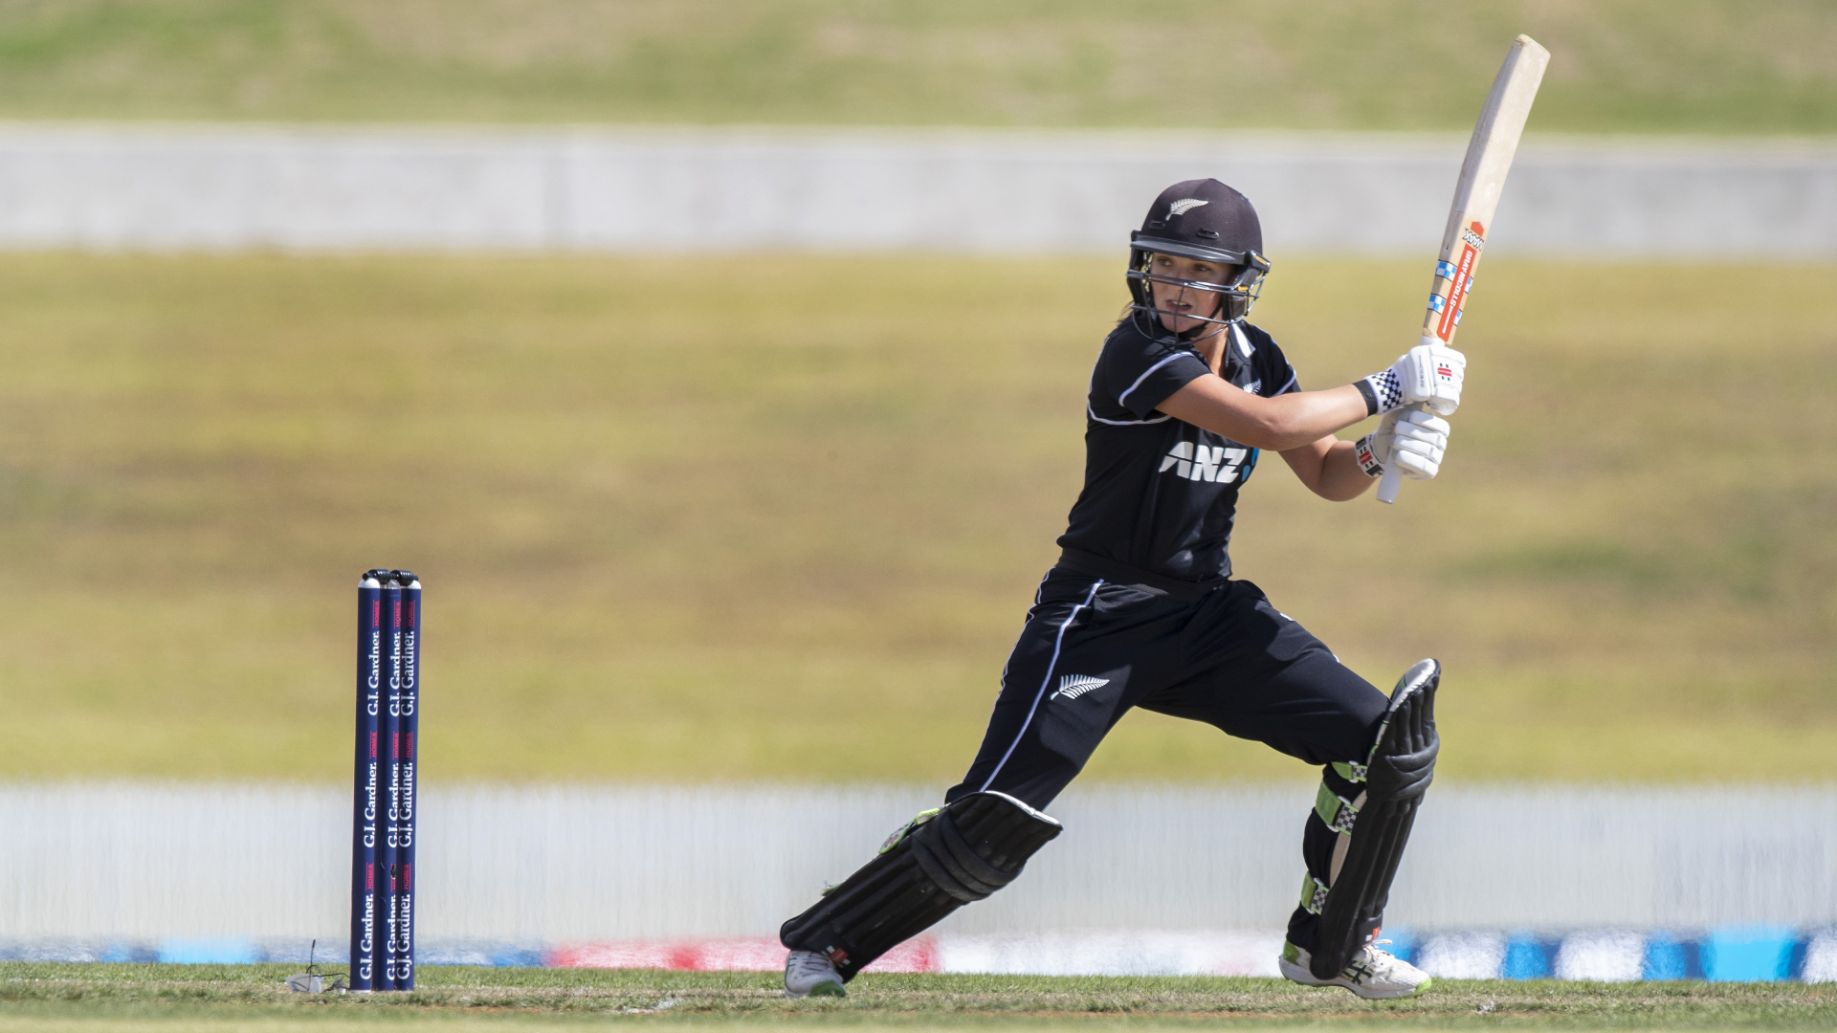 New Zealand allrounder Amelia Kerr prioritises mental health, pulls out of White Ferns' England tour 